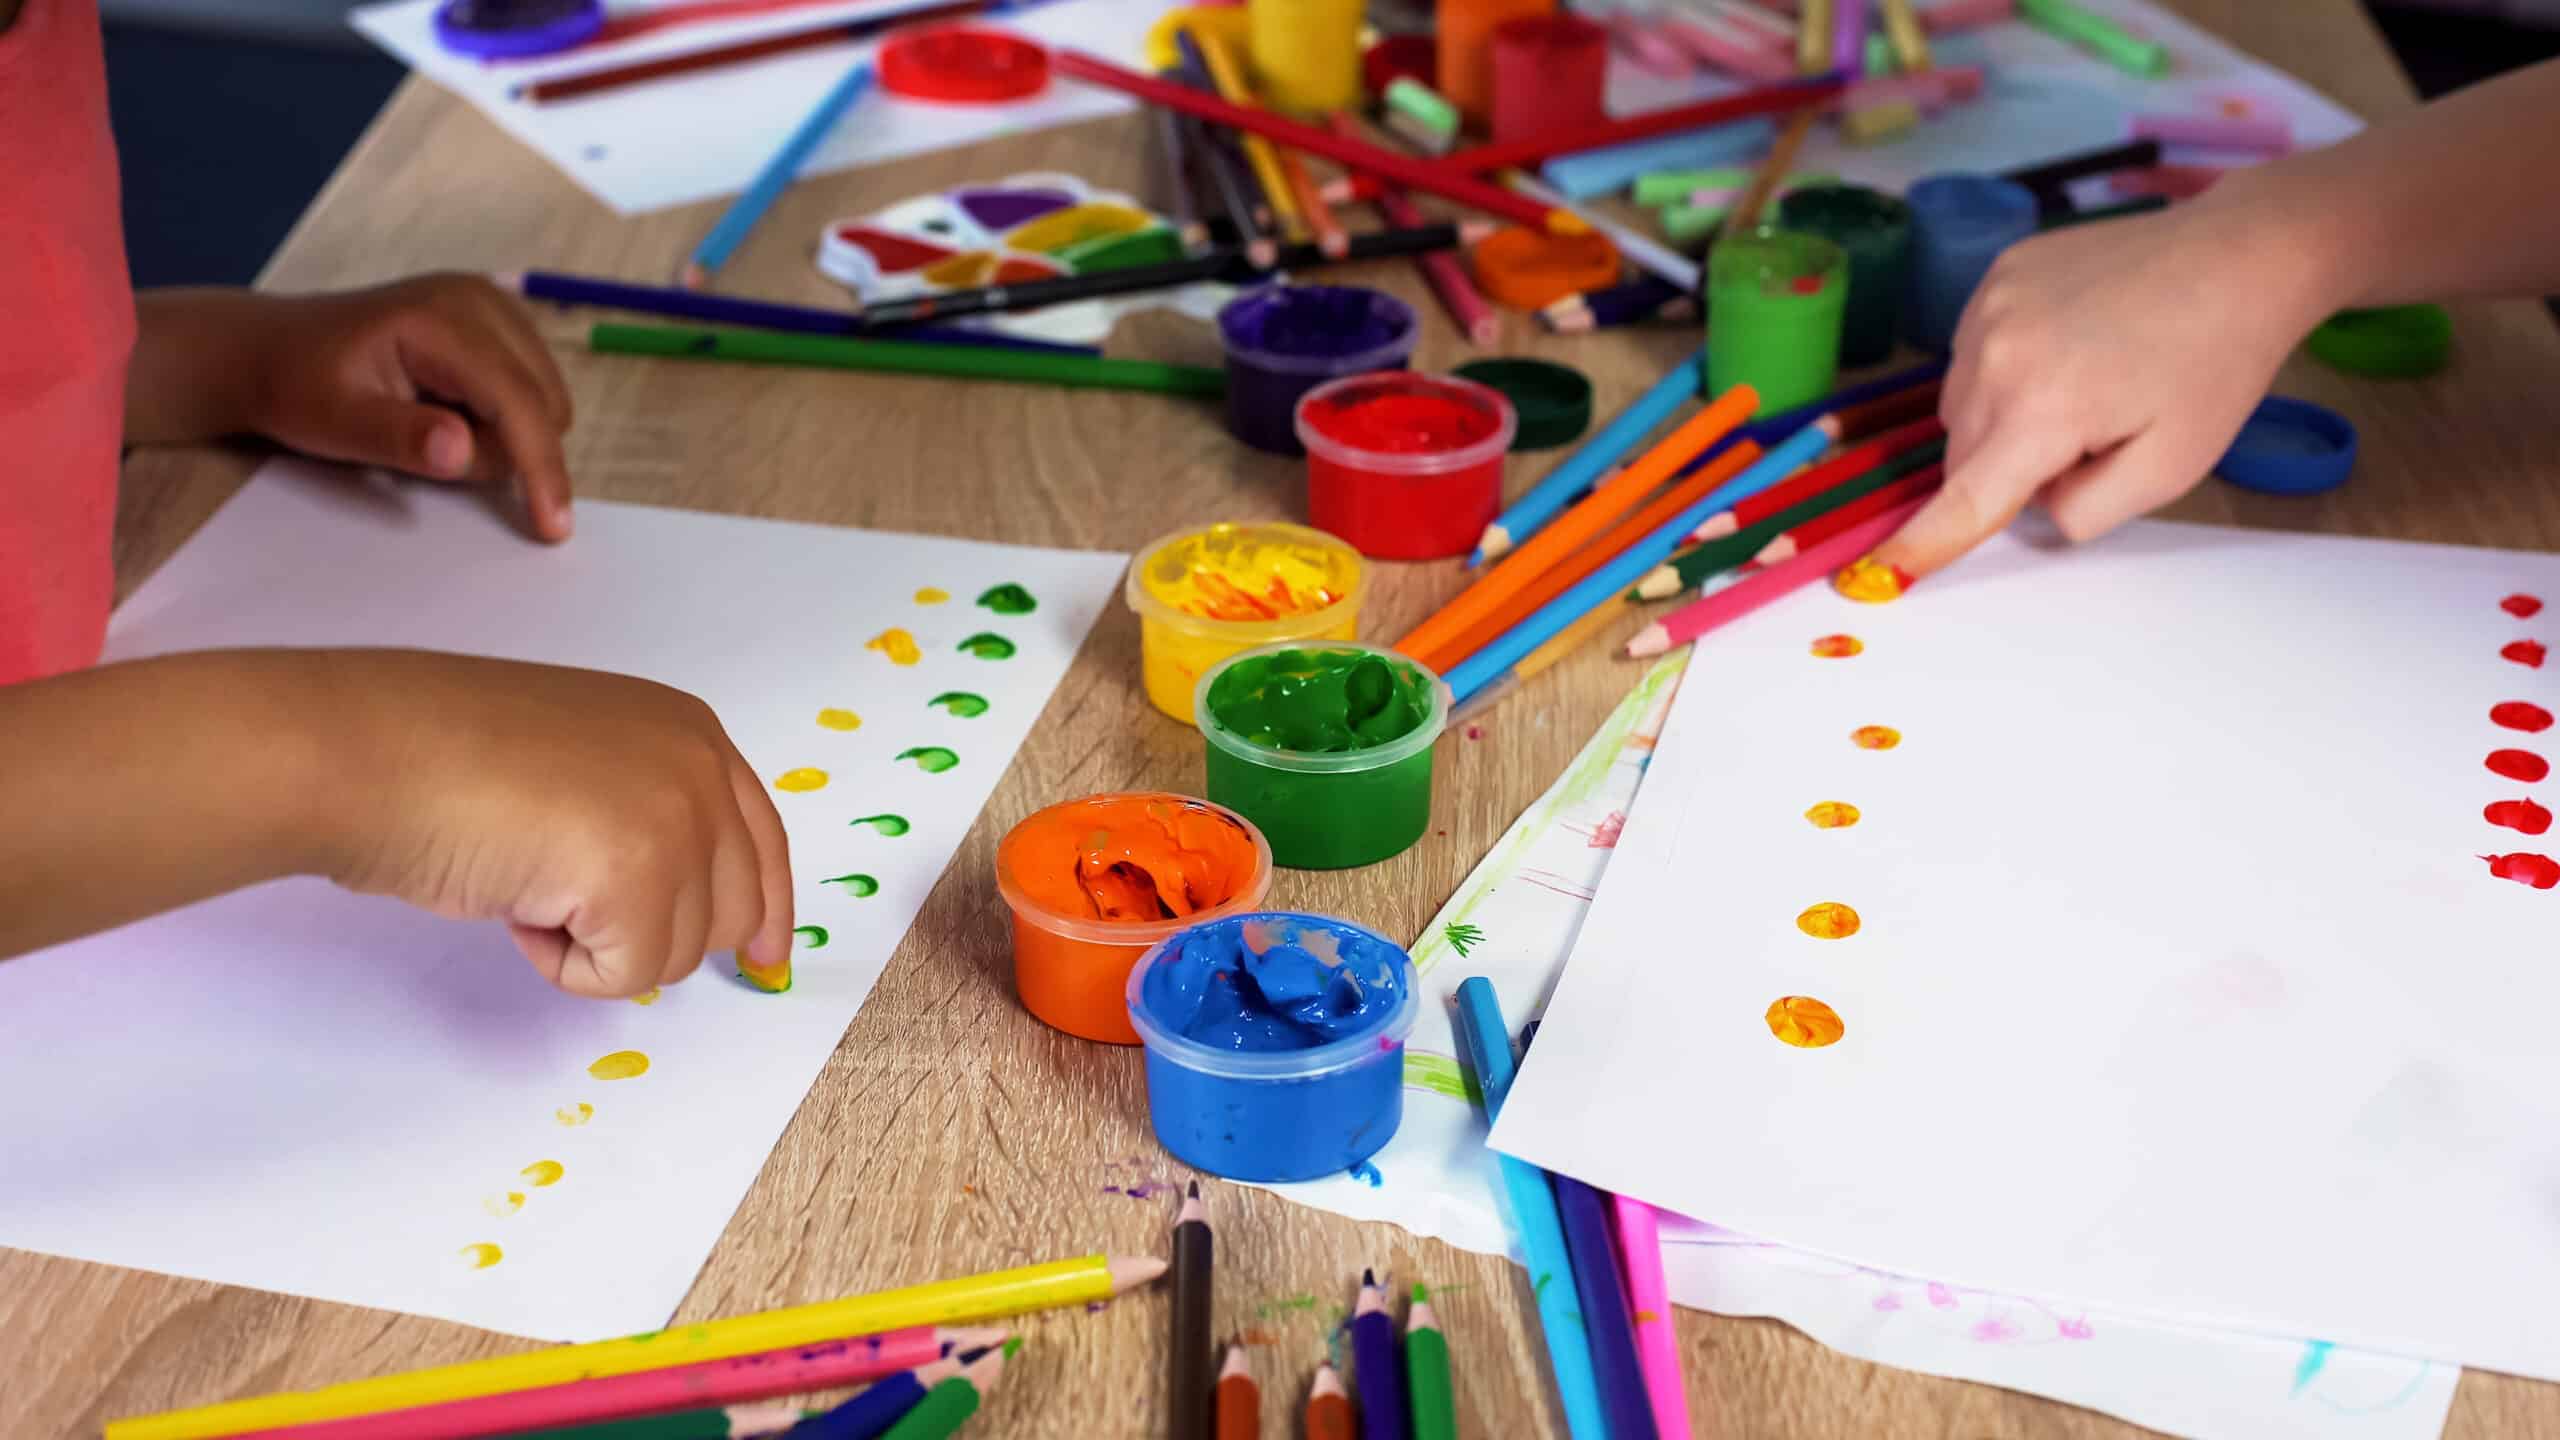 The 21 Best Eco-Friendly & Non-Toxic Art Supplies for Kids - LeafScore